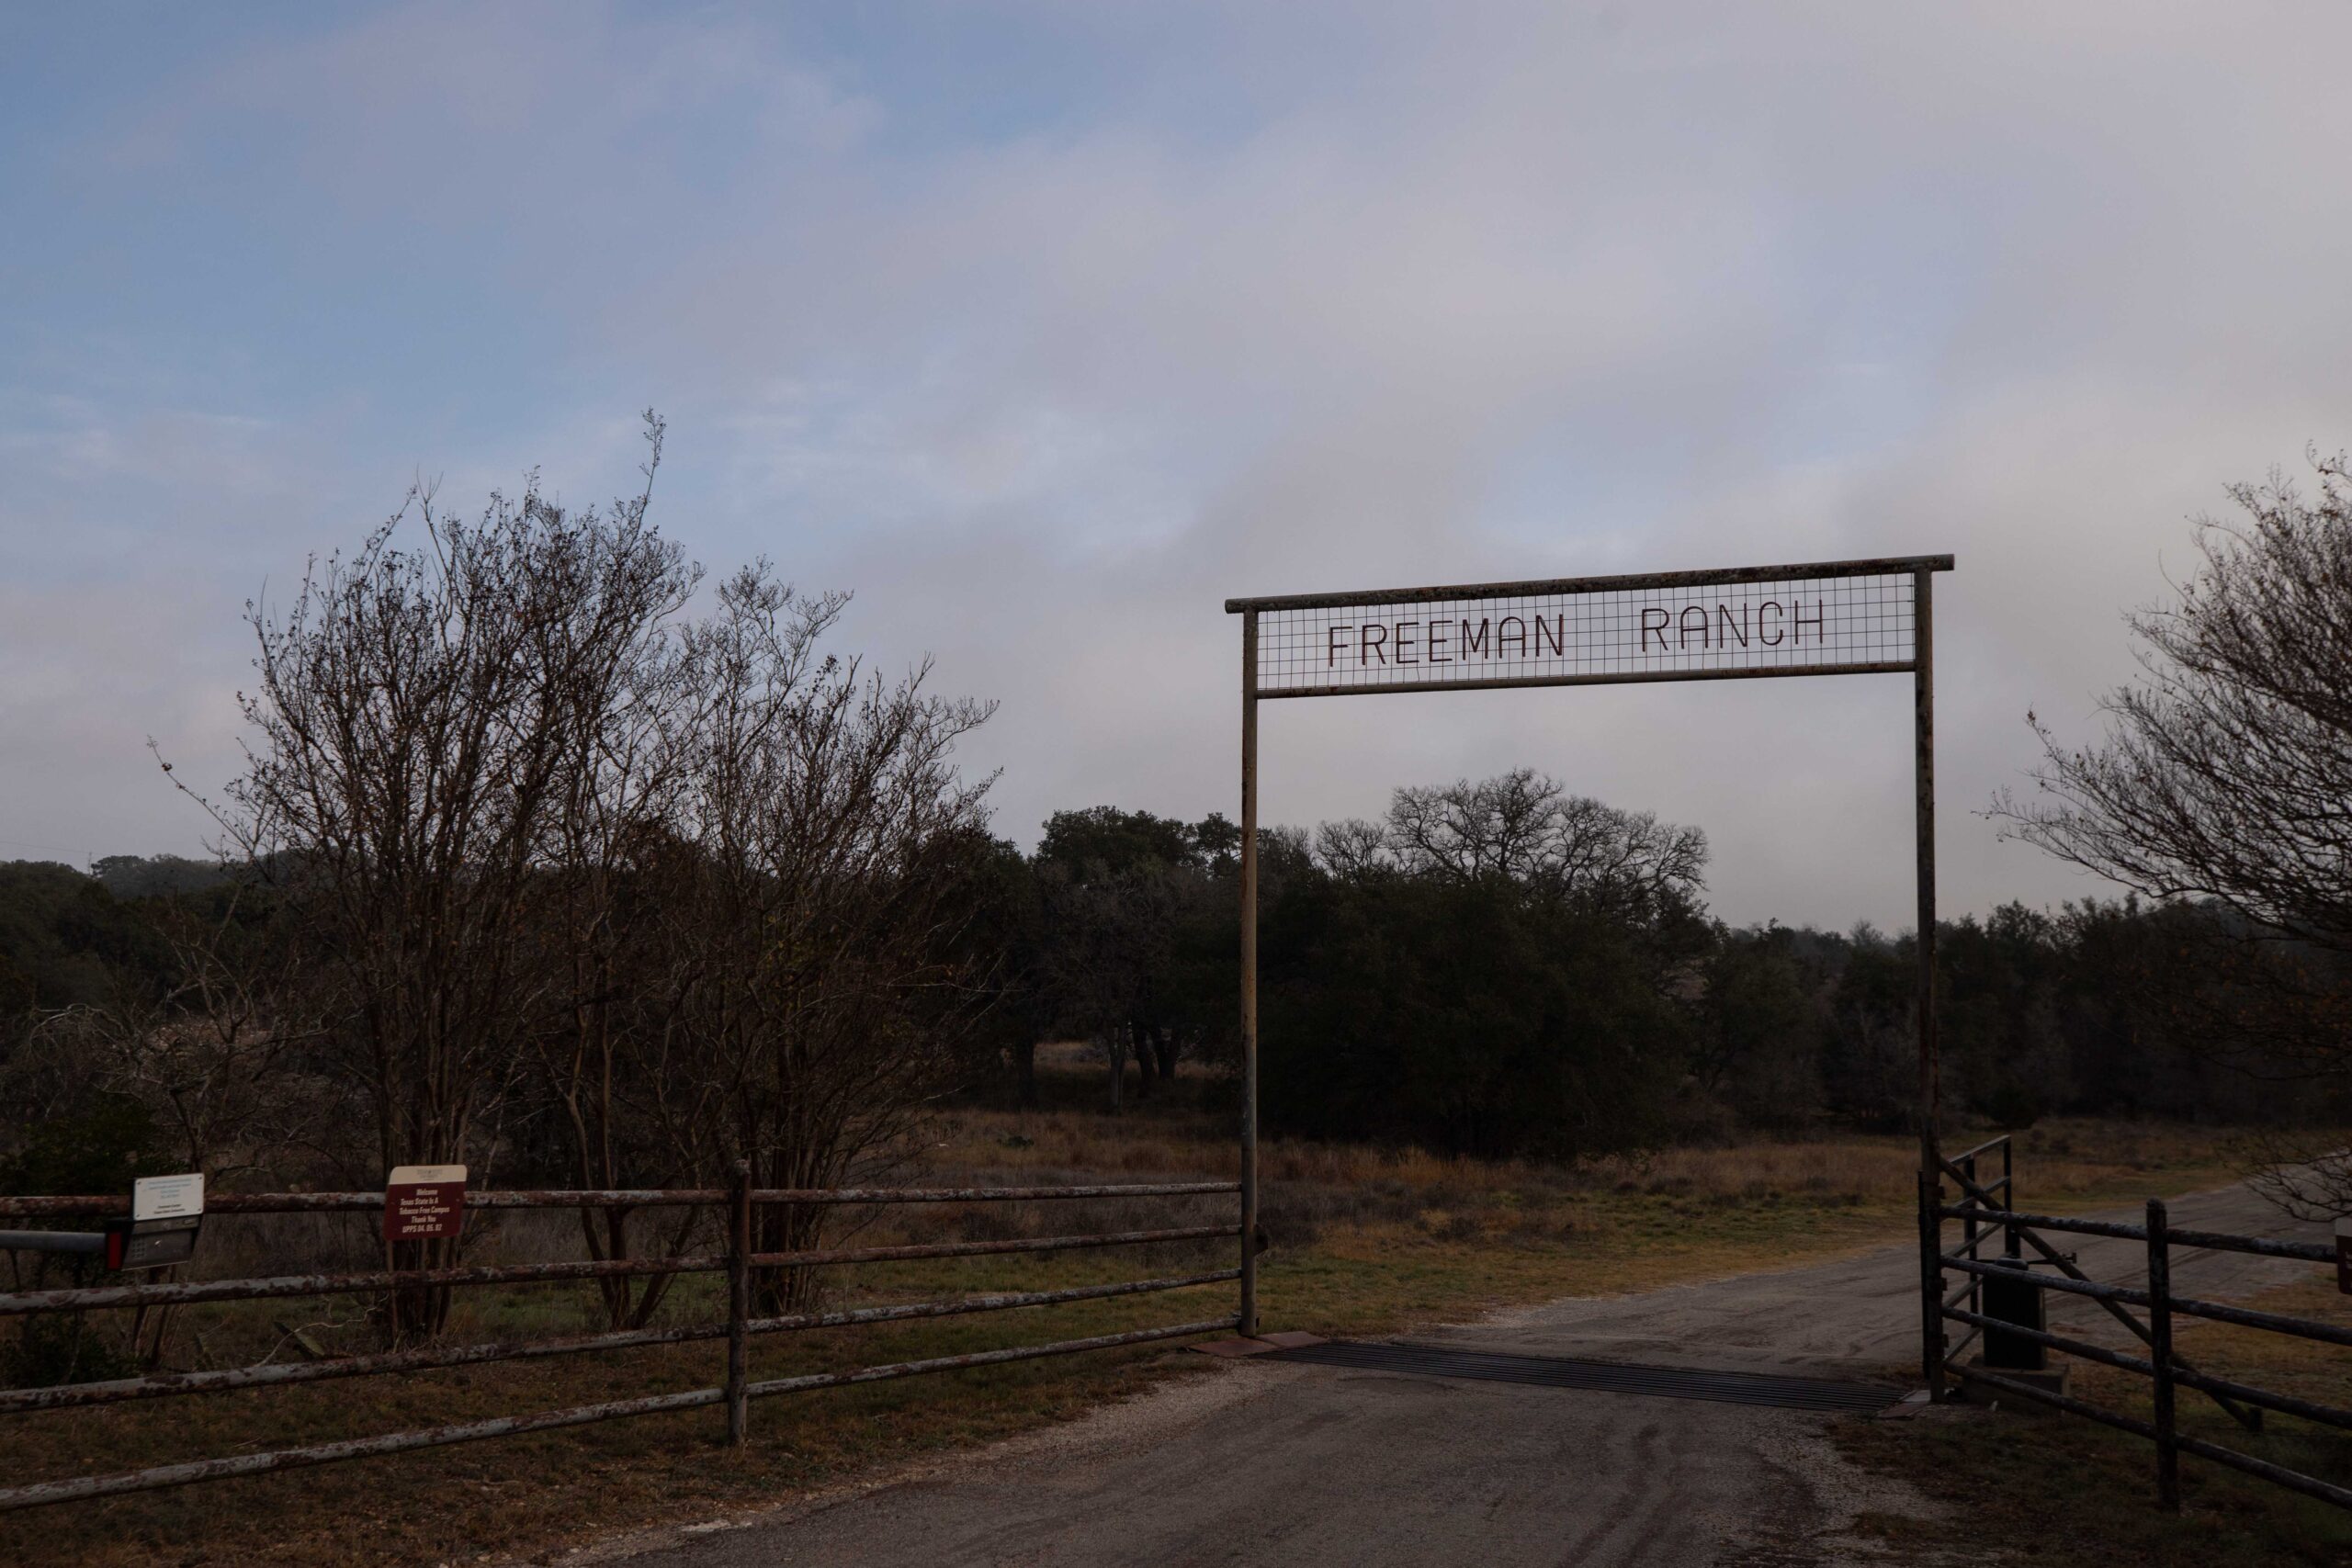 The sun is low over the Freeman Ranch gate, with a dirt path leading into the body ranch.